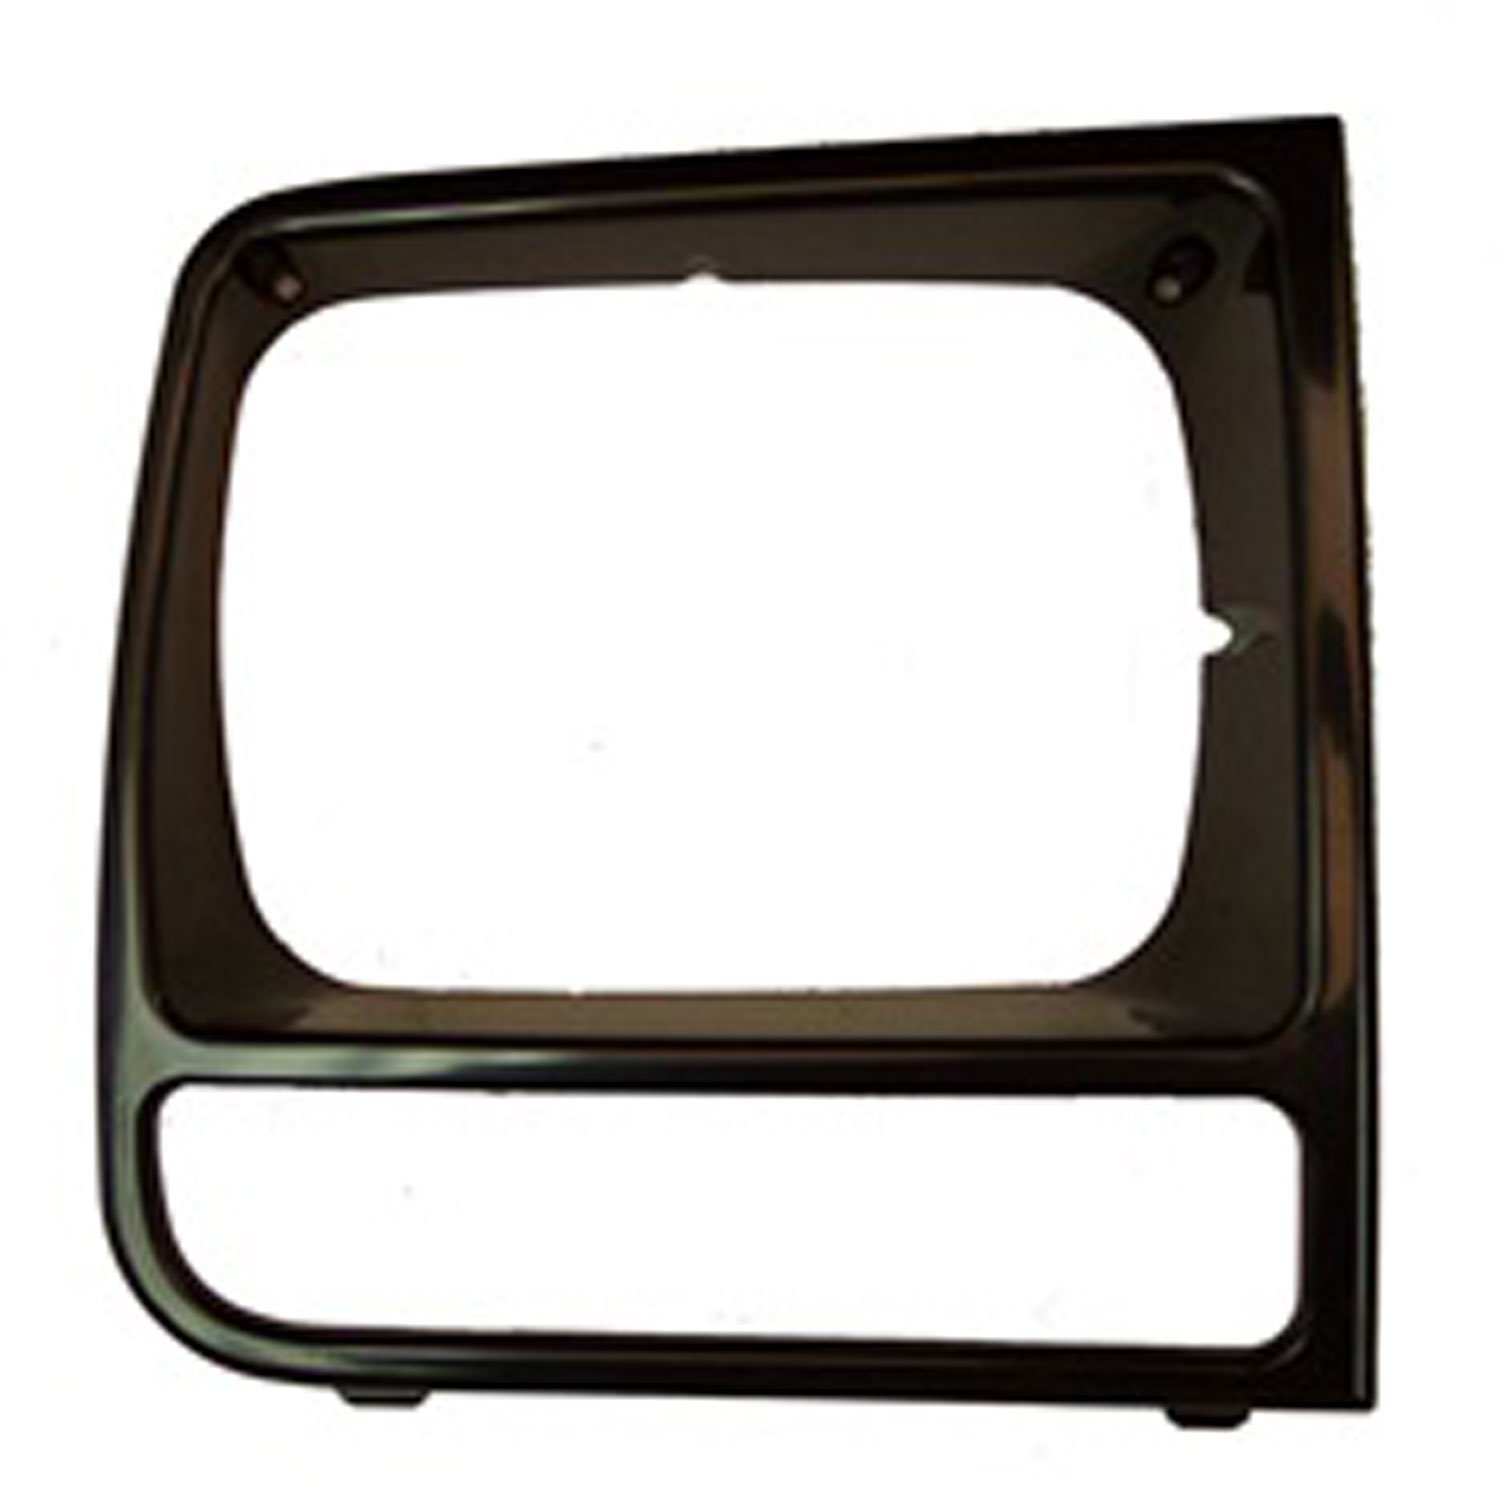 This black headlight bezel from Omix-ADA fits the right side on 97-01 Jeep Cherokee XJ.